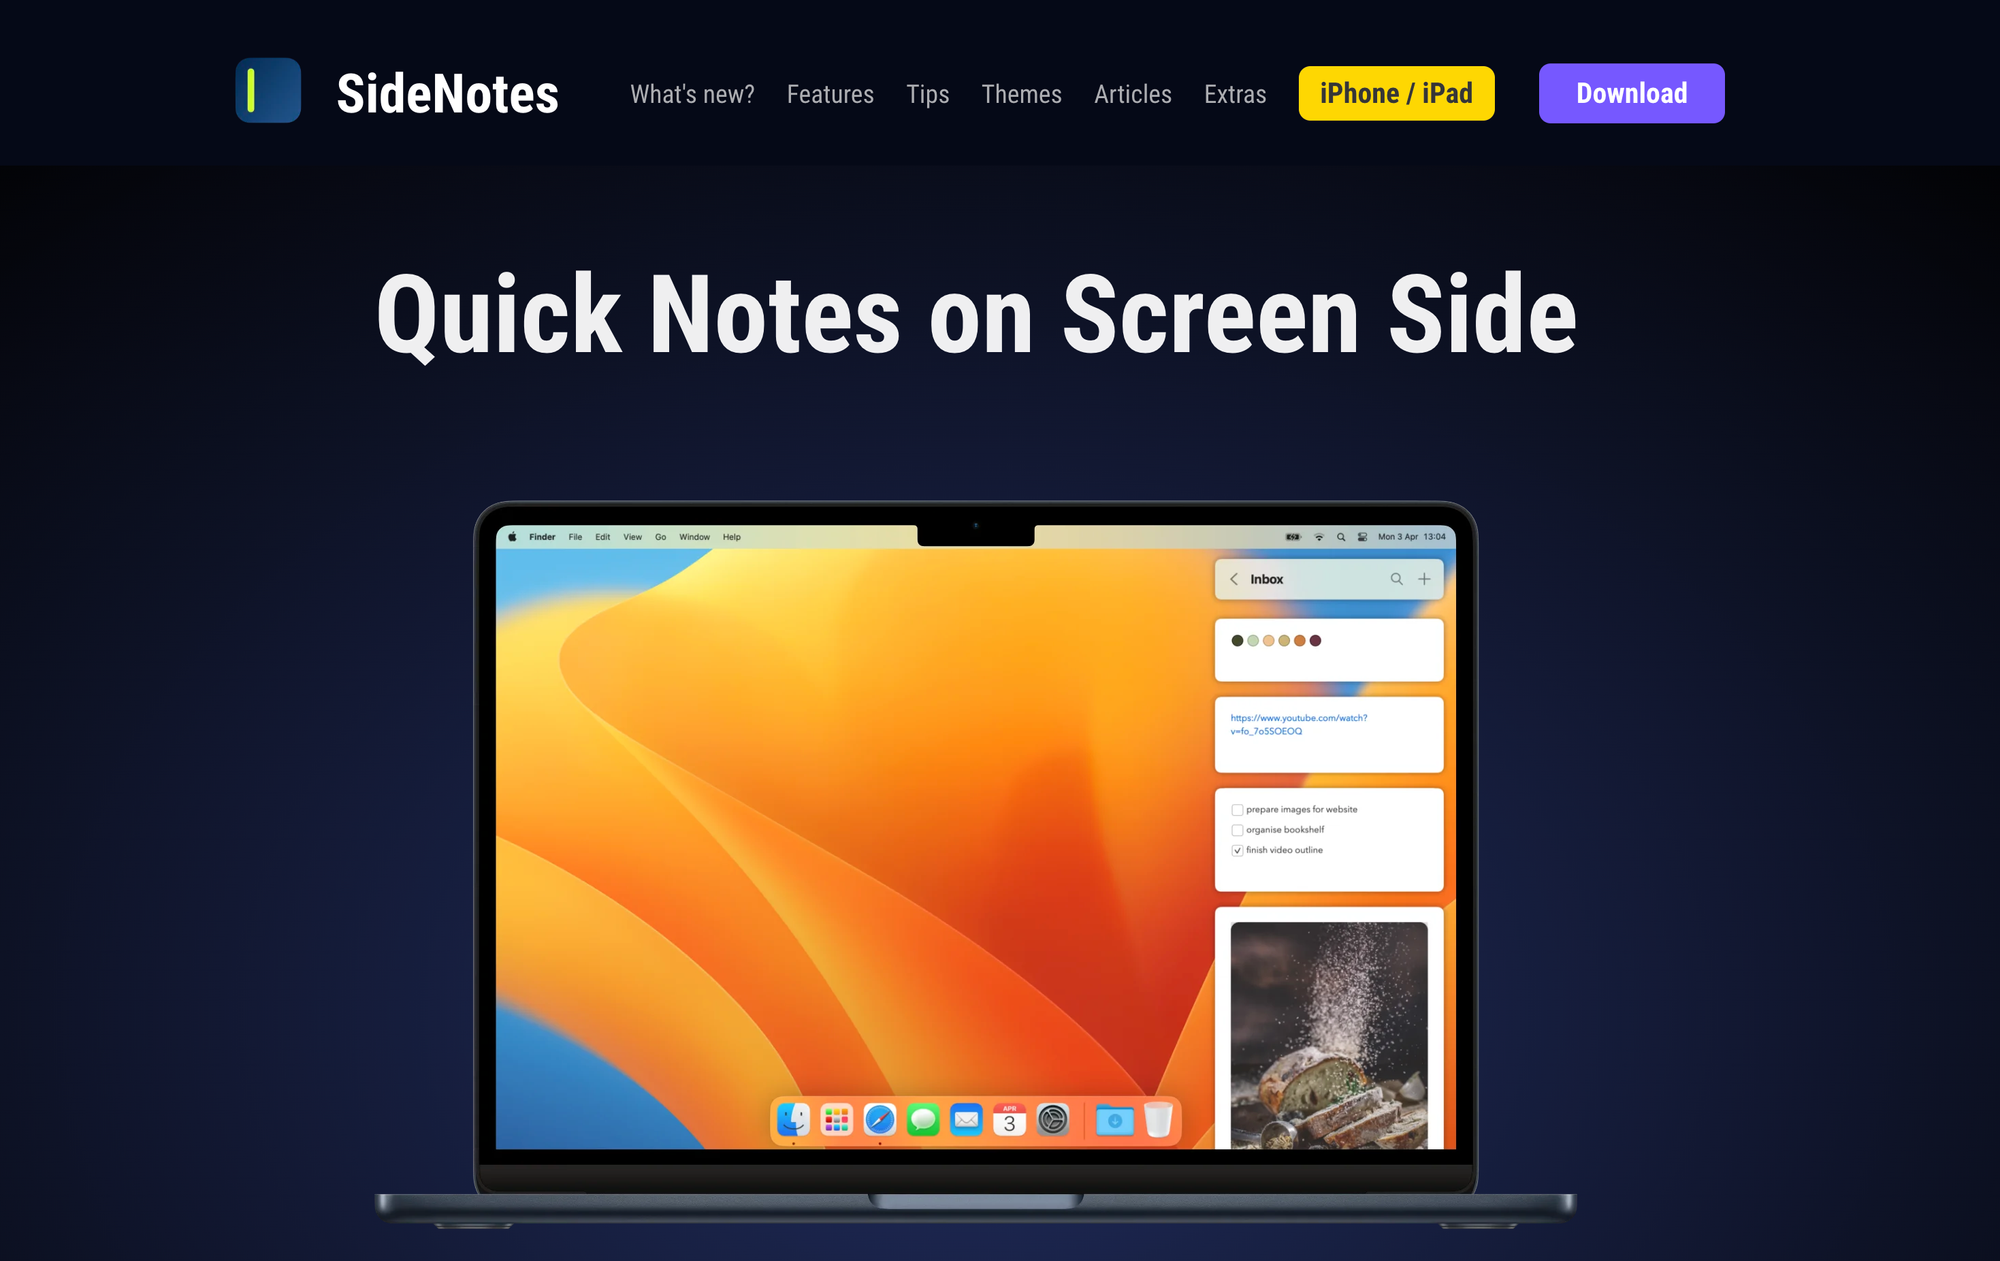 Screenshot of SideNotes app's homepage